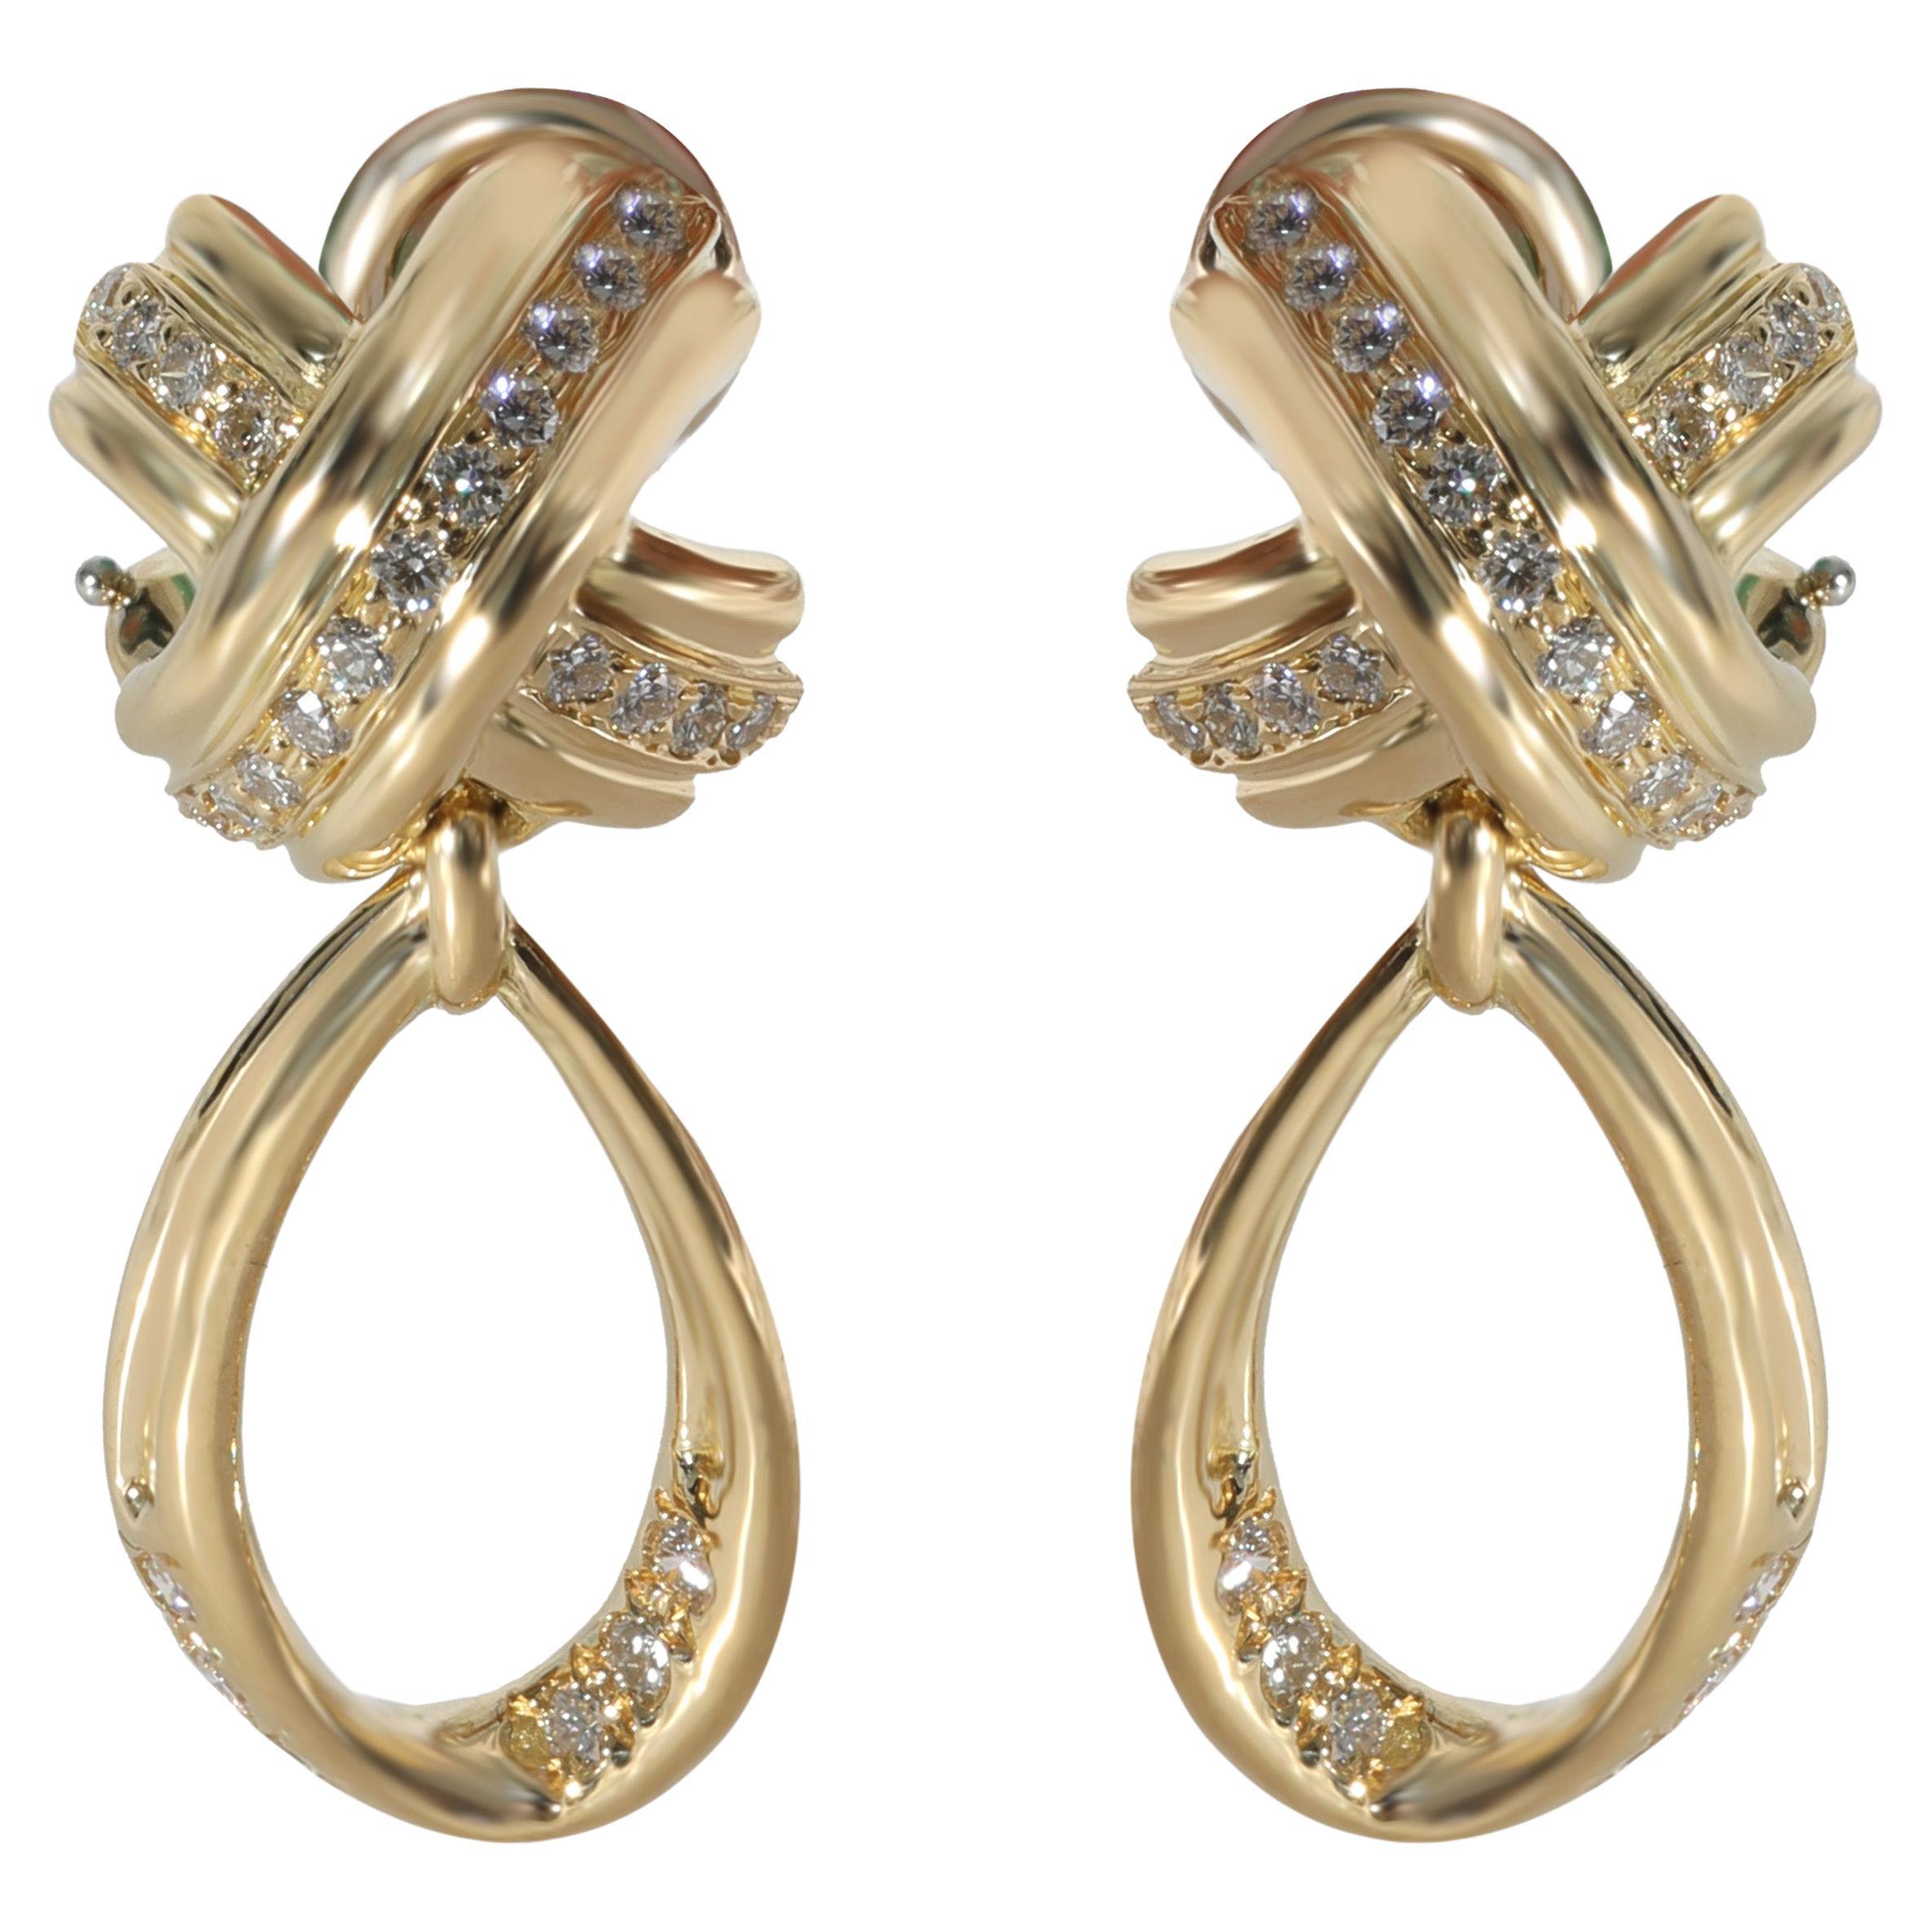 Tiffany & Co. Vintage Signature x Diamond Earrings in 18k Yellow Gold 0.6 CTW For Sale